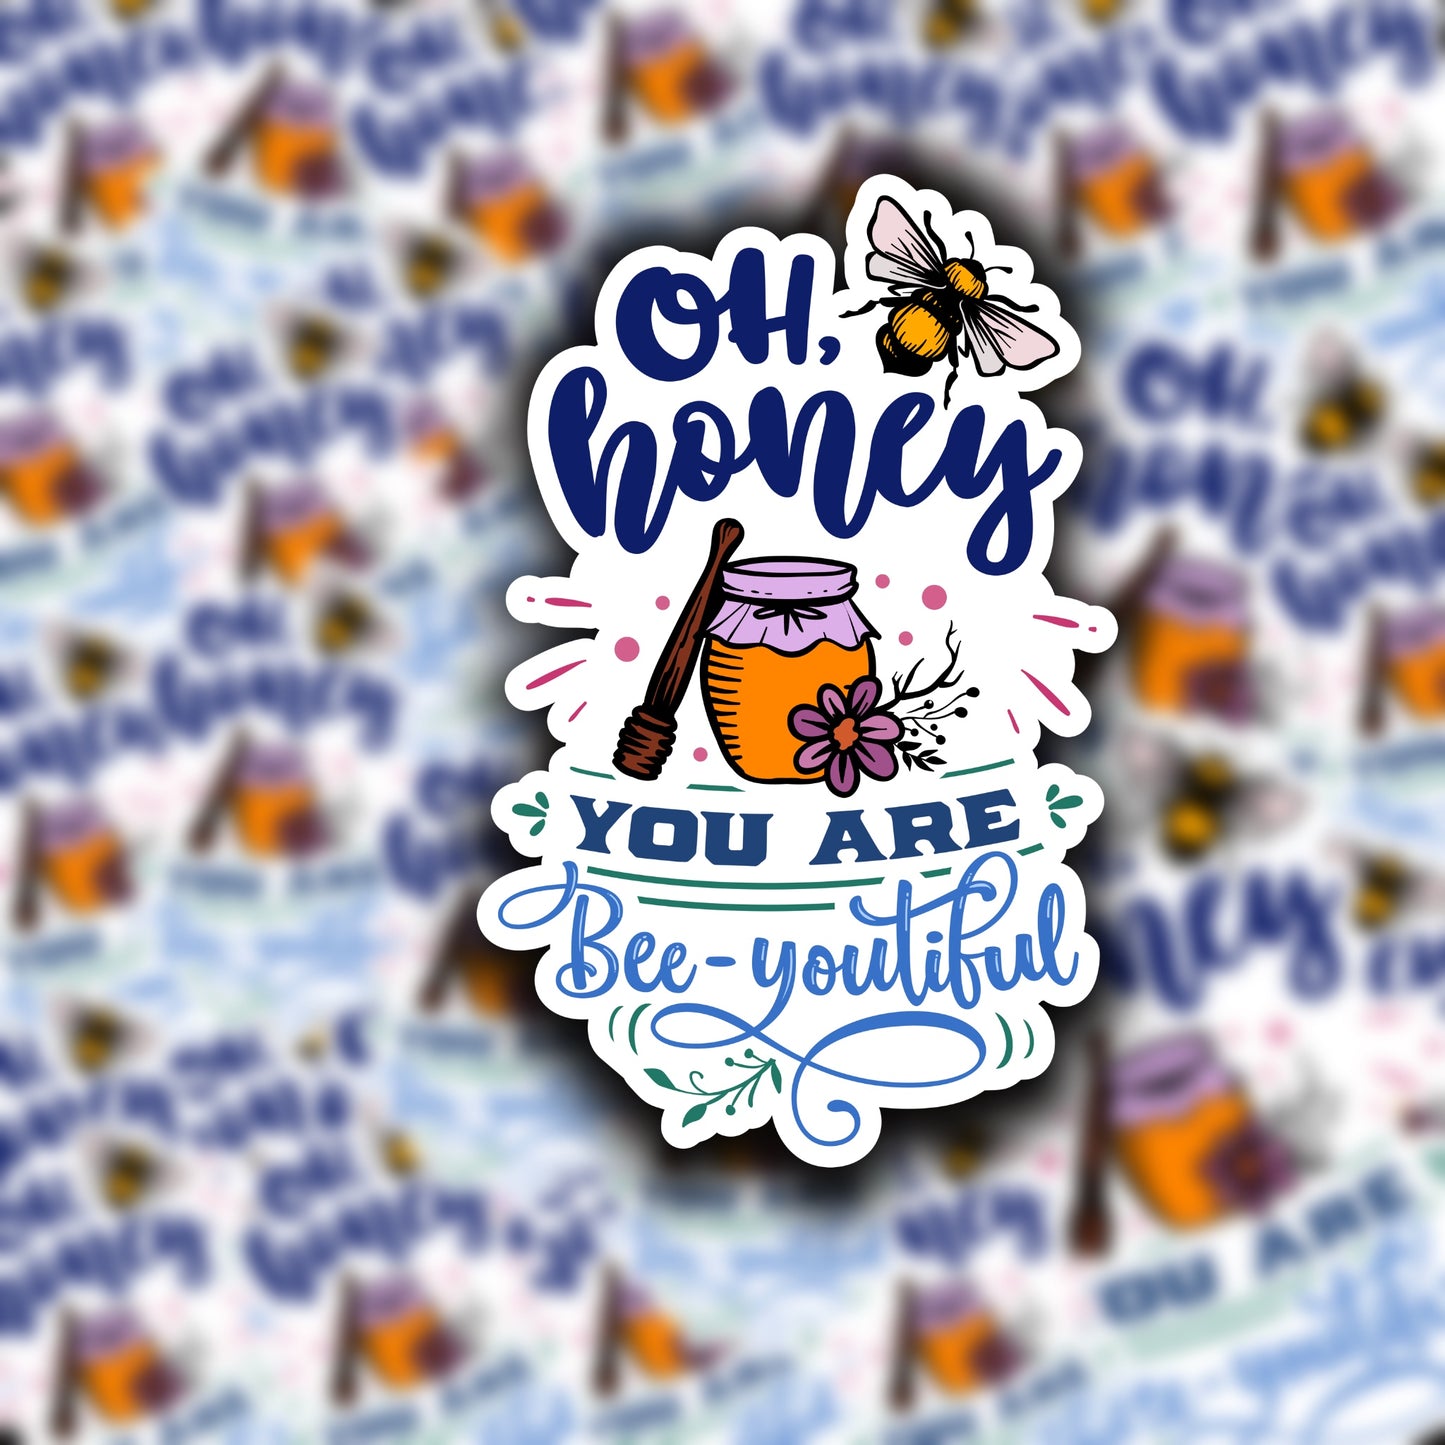 Bee-youtiful - Sticker or Magnet